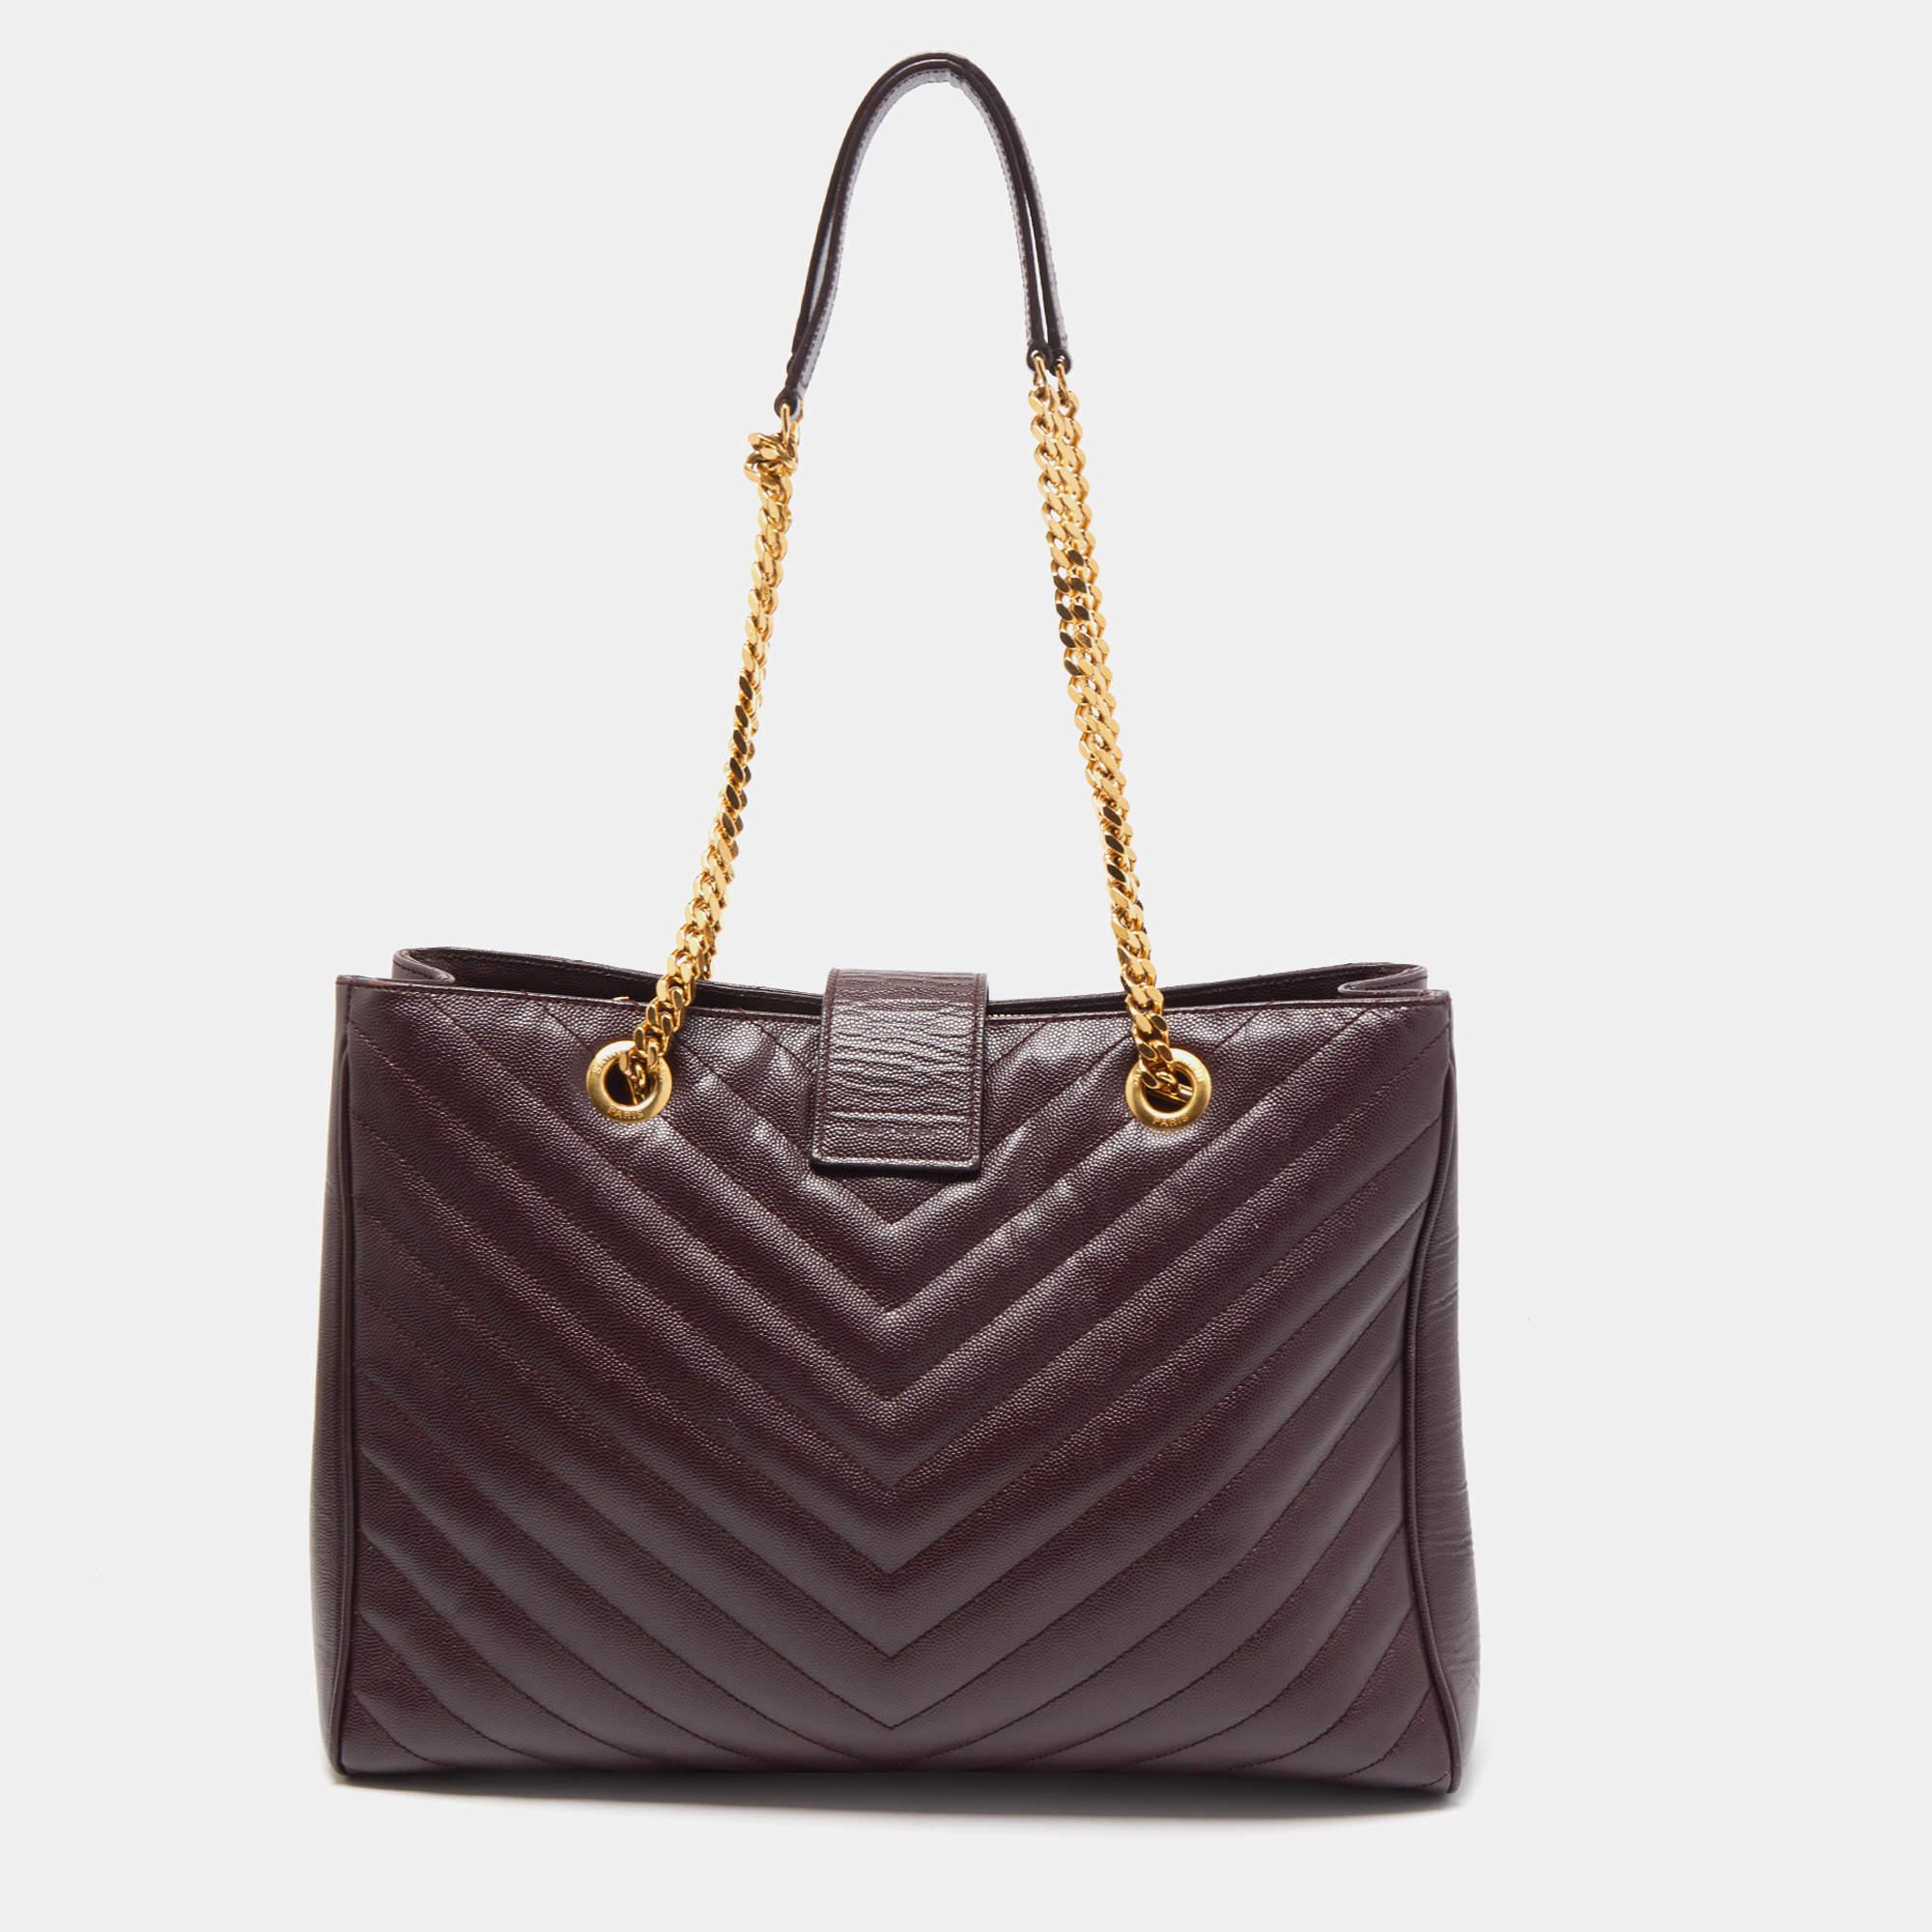 This Saint Laurent bag is stunning, with chevron lines and an elegant design. The bag has chain handles and a YSL logo in gold-tone metal. The fabric interior is divided by a zip compartment and will easily hold your essentials.
 
Includes: Original